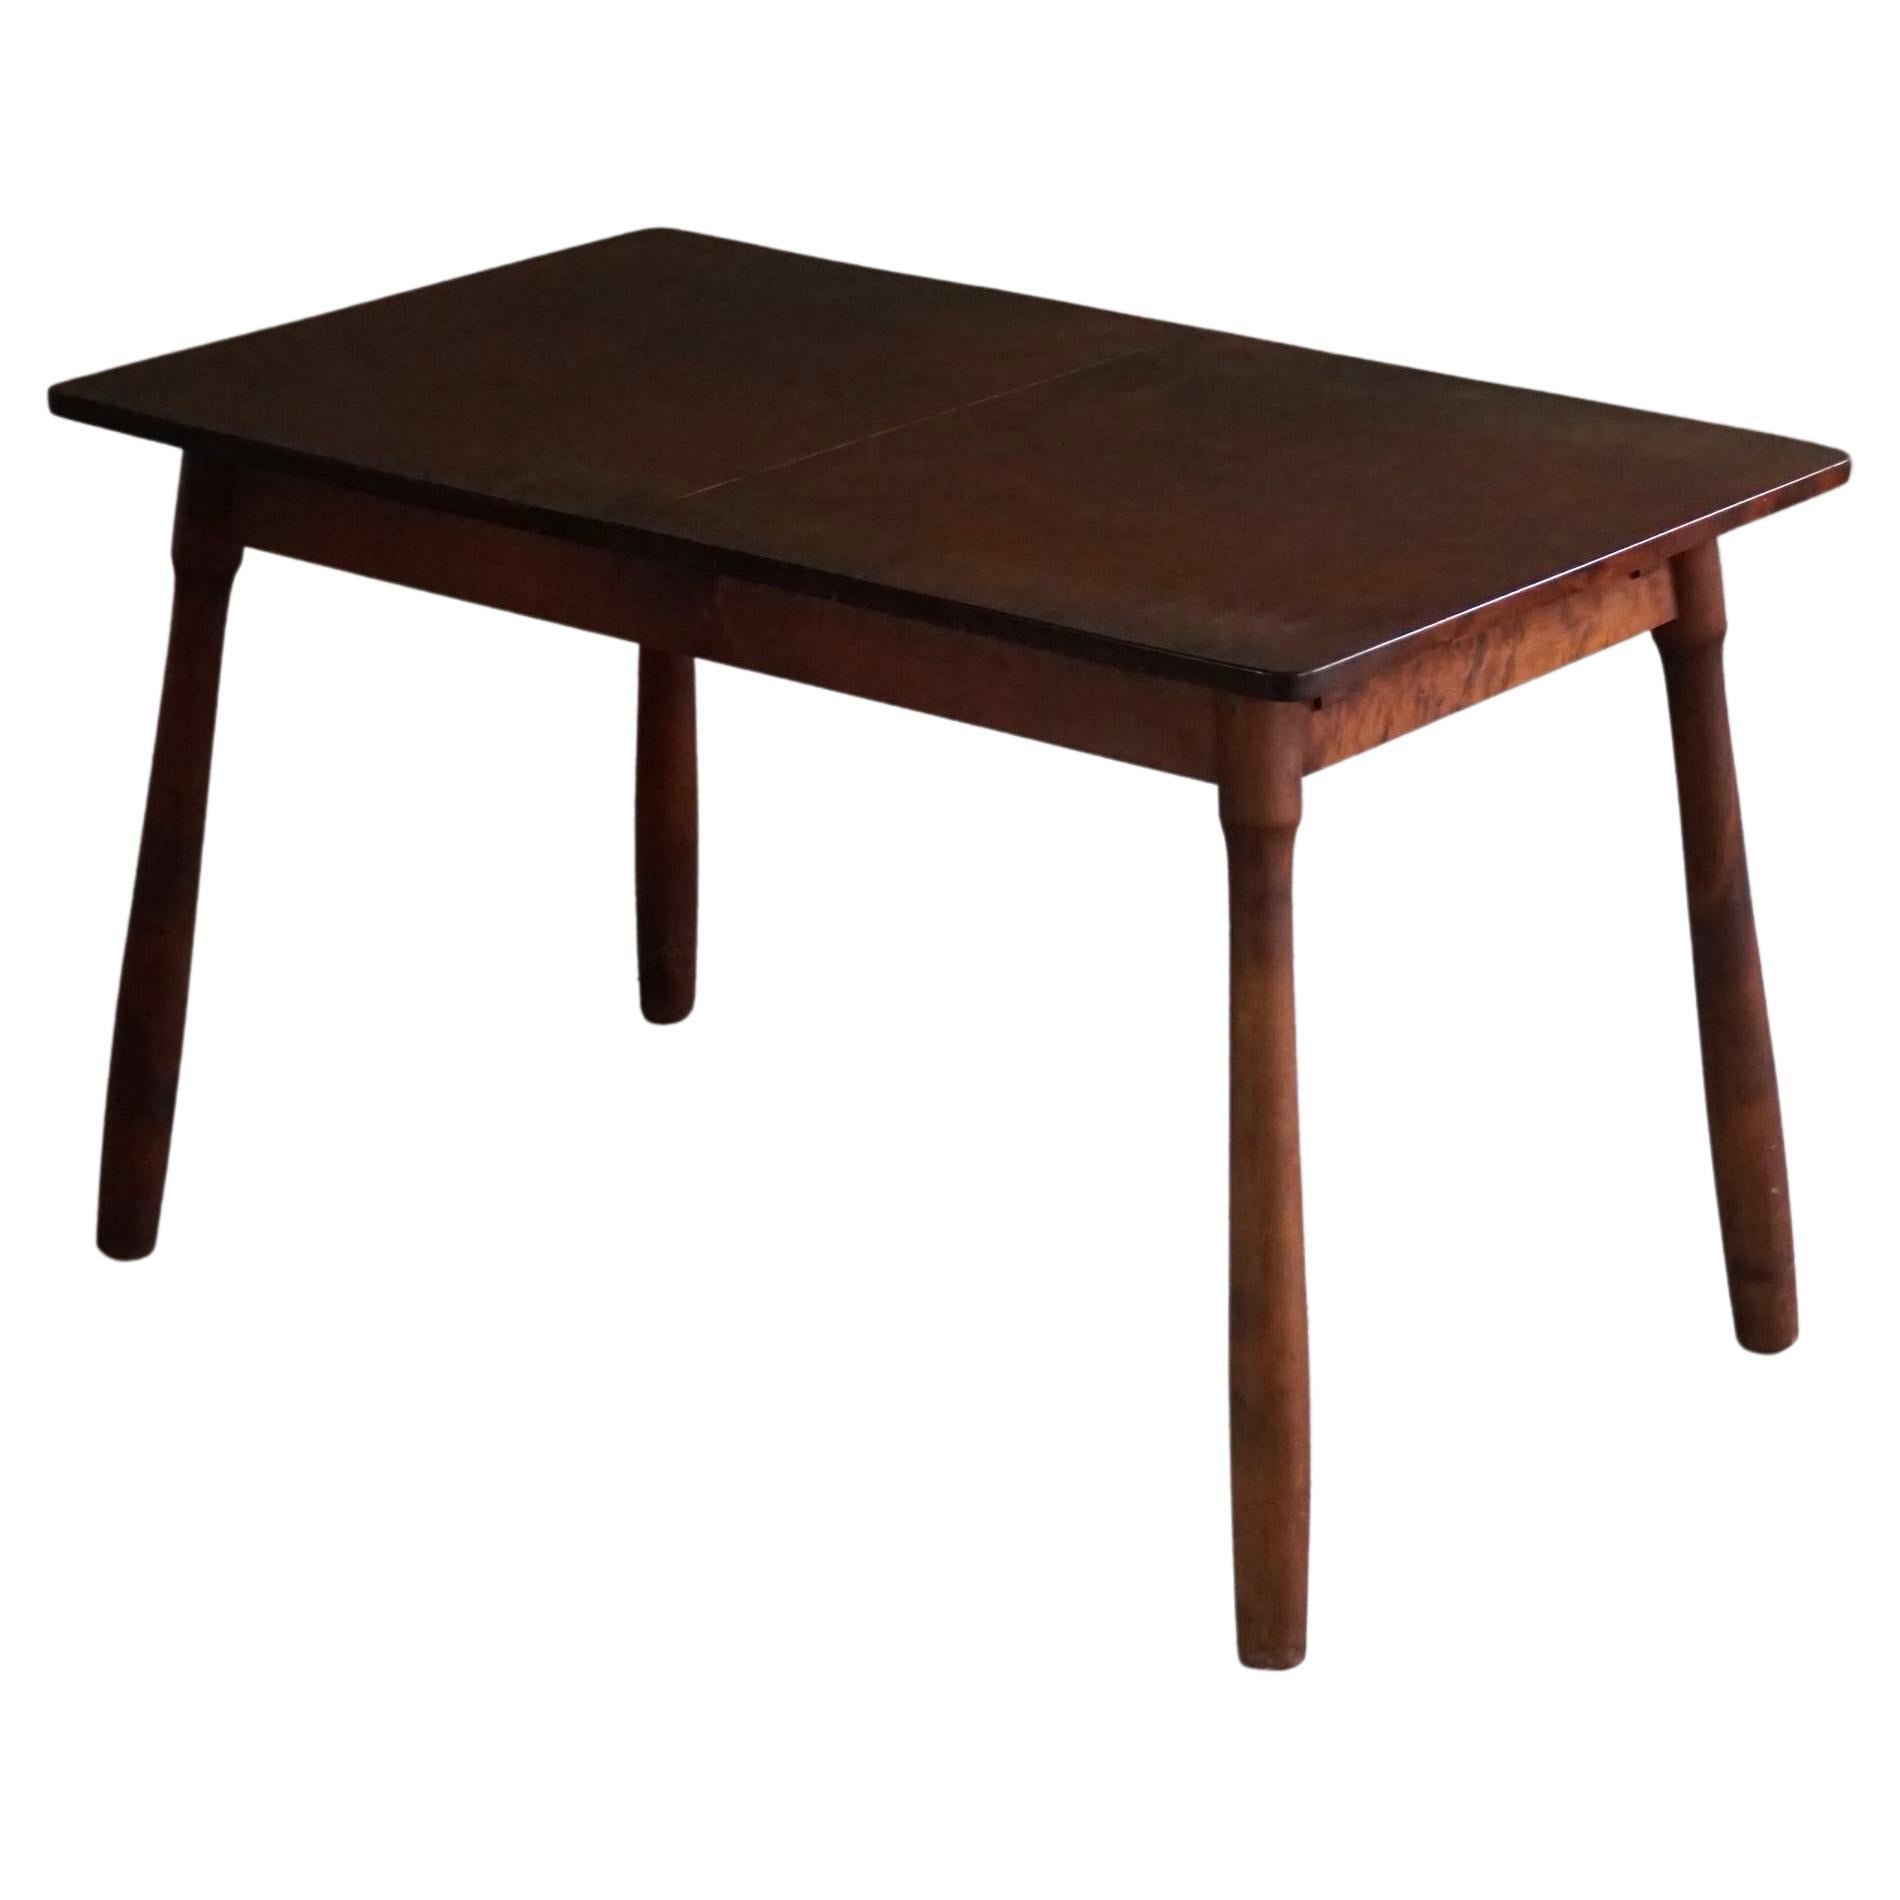 Scandinavian Modern, Table in Beech With Club Legs, Arnold Madsen, Made in 1940s For Sale